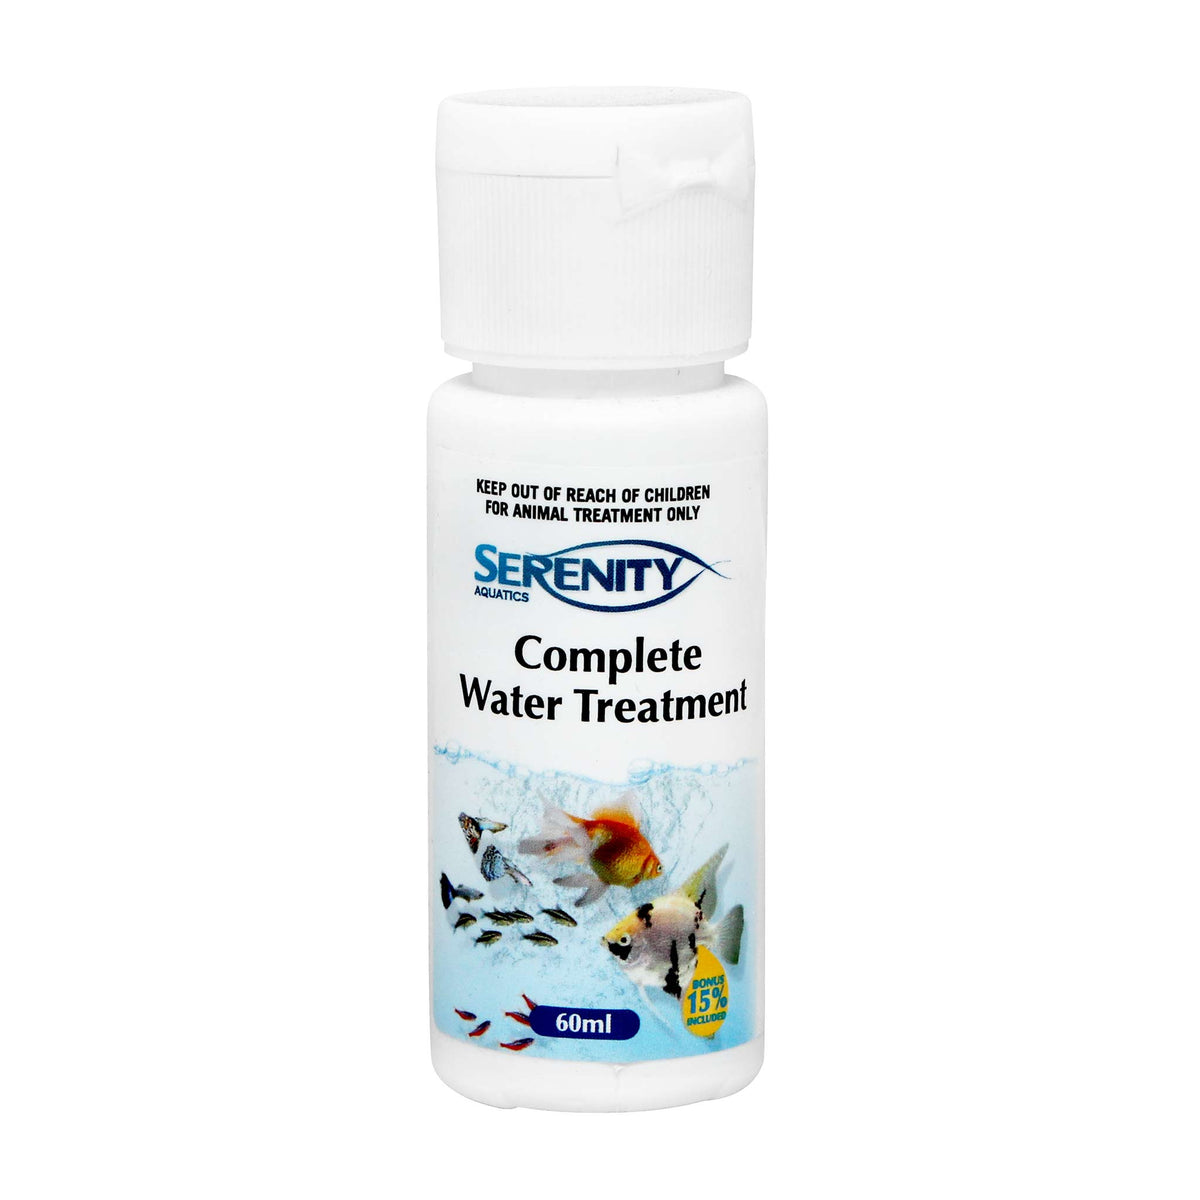 Serenity Complete Water Treatment for Aquariums